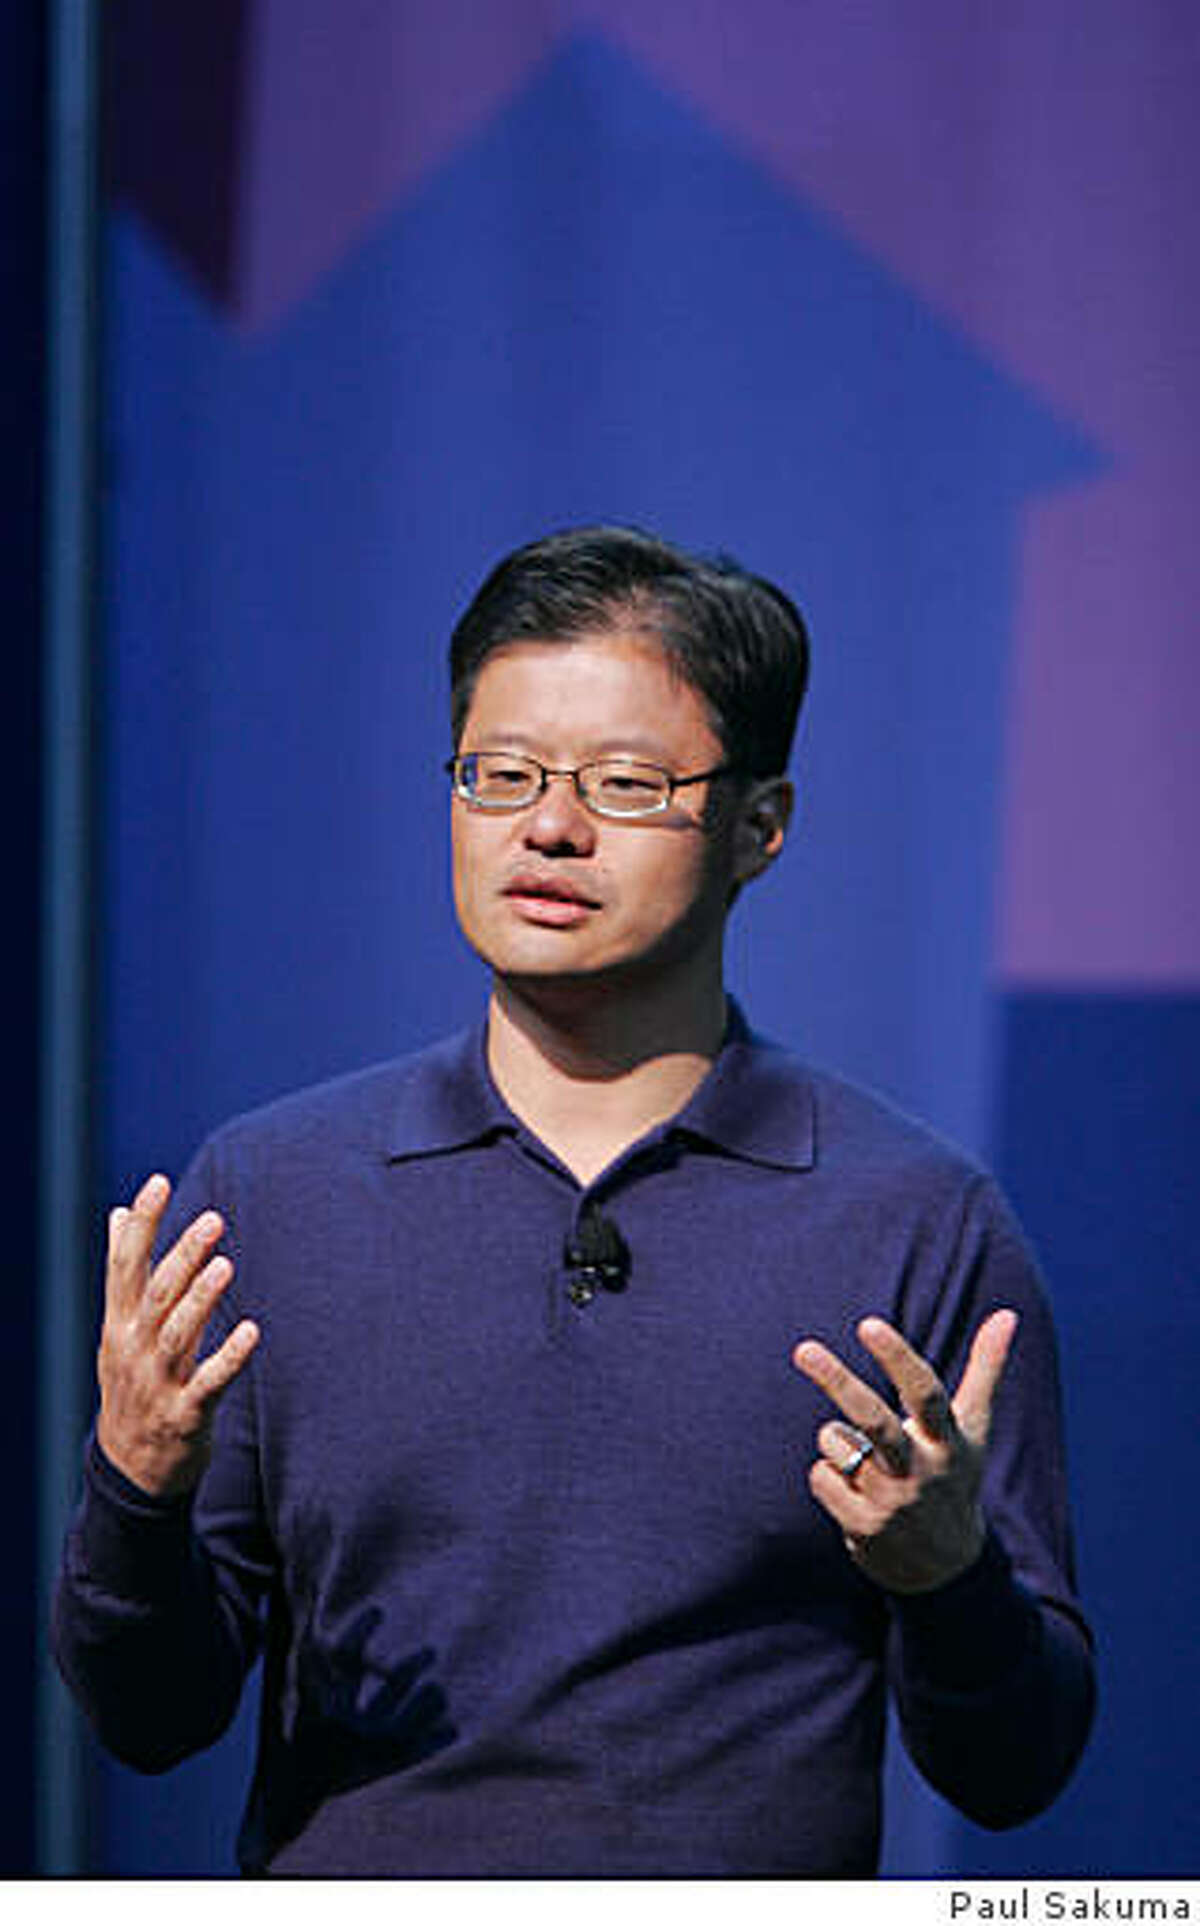 ** FILE ** Yahoo CEO Jerry Yang gives a keynote address at the Consumer Electronics Show (CES) in Las Vegas, in this Jan. 7, 2008 file photo. Yahoo Inc. Chief Executive Jerry Yang told employees Wednesday Feb. 6, 2008, that the struggling Internet pioneer is still examining ways to avoid a takeover by rival Microsoft Corp. (AP Photo/Paul Sakuma, file)